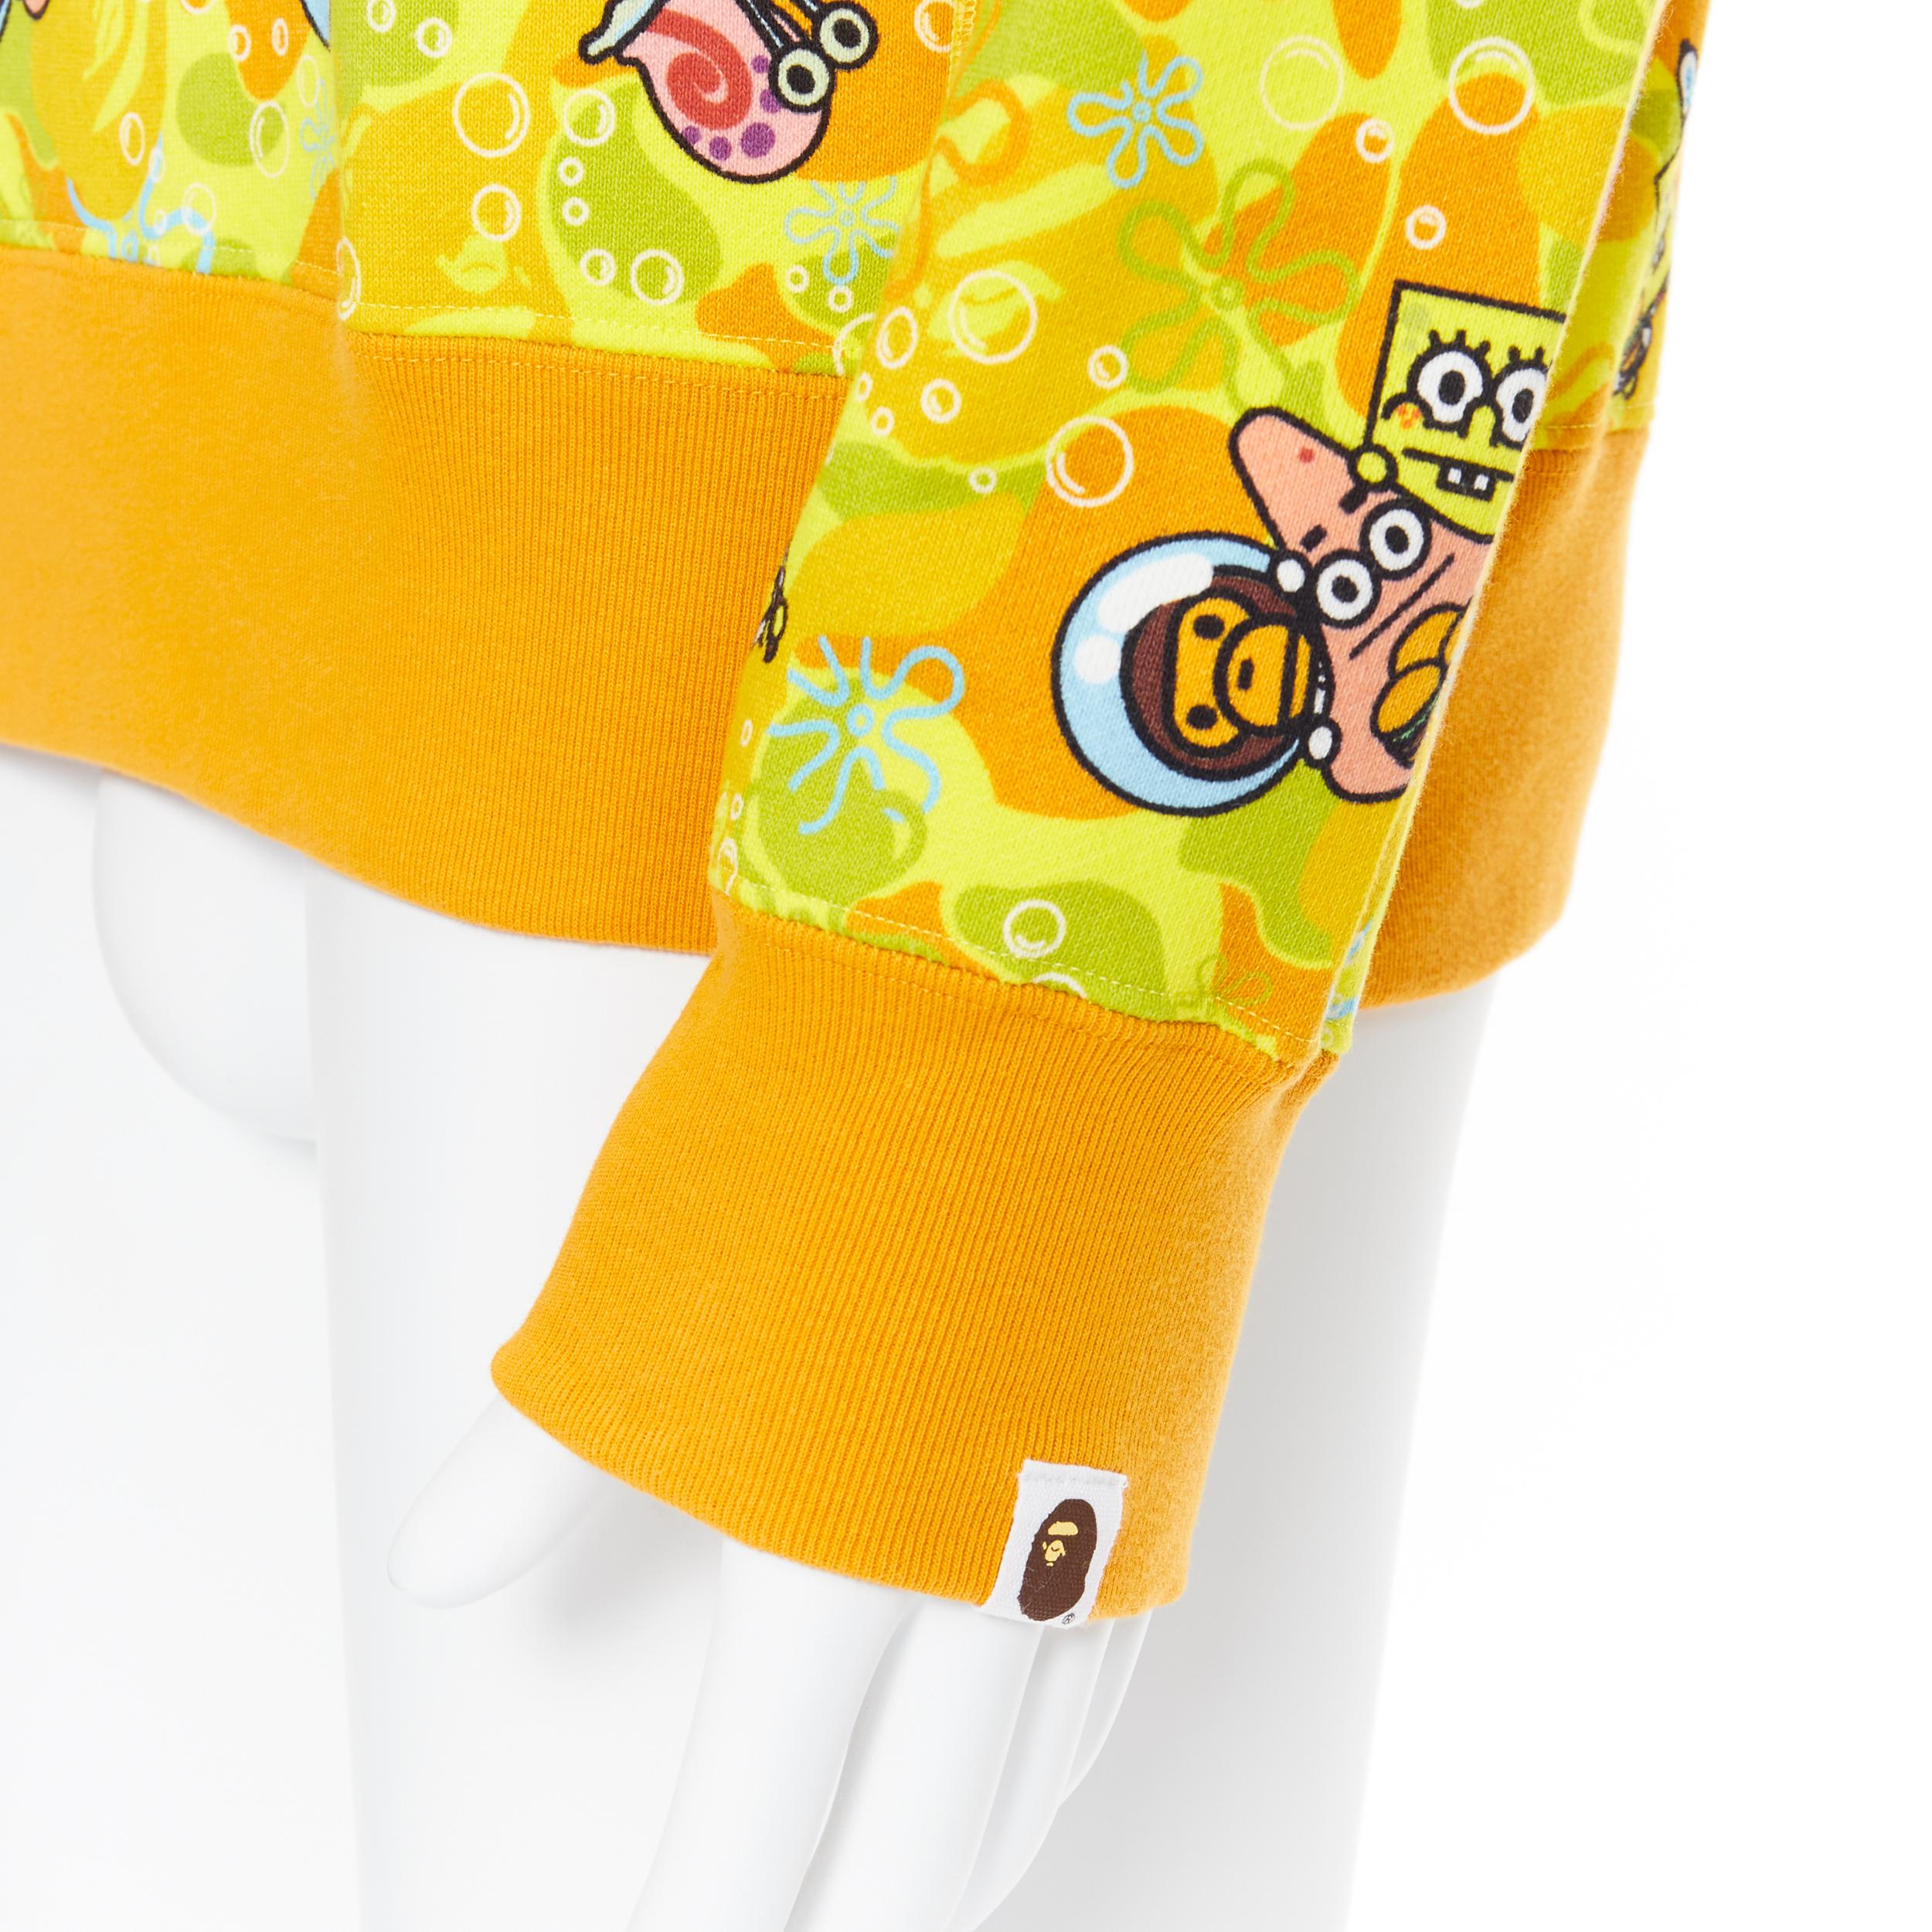 new BATHING APE BAPE SPONGEBOB SQUAREPANTS yellow camo print pullover sweater L
Brand: Bathing Ape
Collection: Spongebob Squarepants 
Model Name / Style: Sweater
Material: Cotton
Color: Yellow
Pattern: Camouflage
Extra Detail: Pullover sweater.
Made